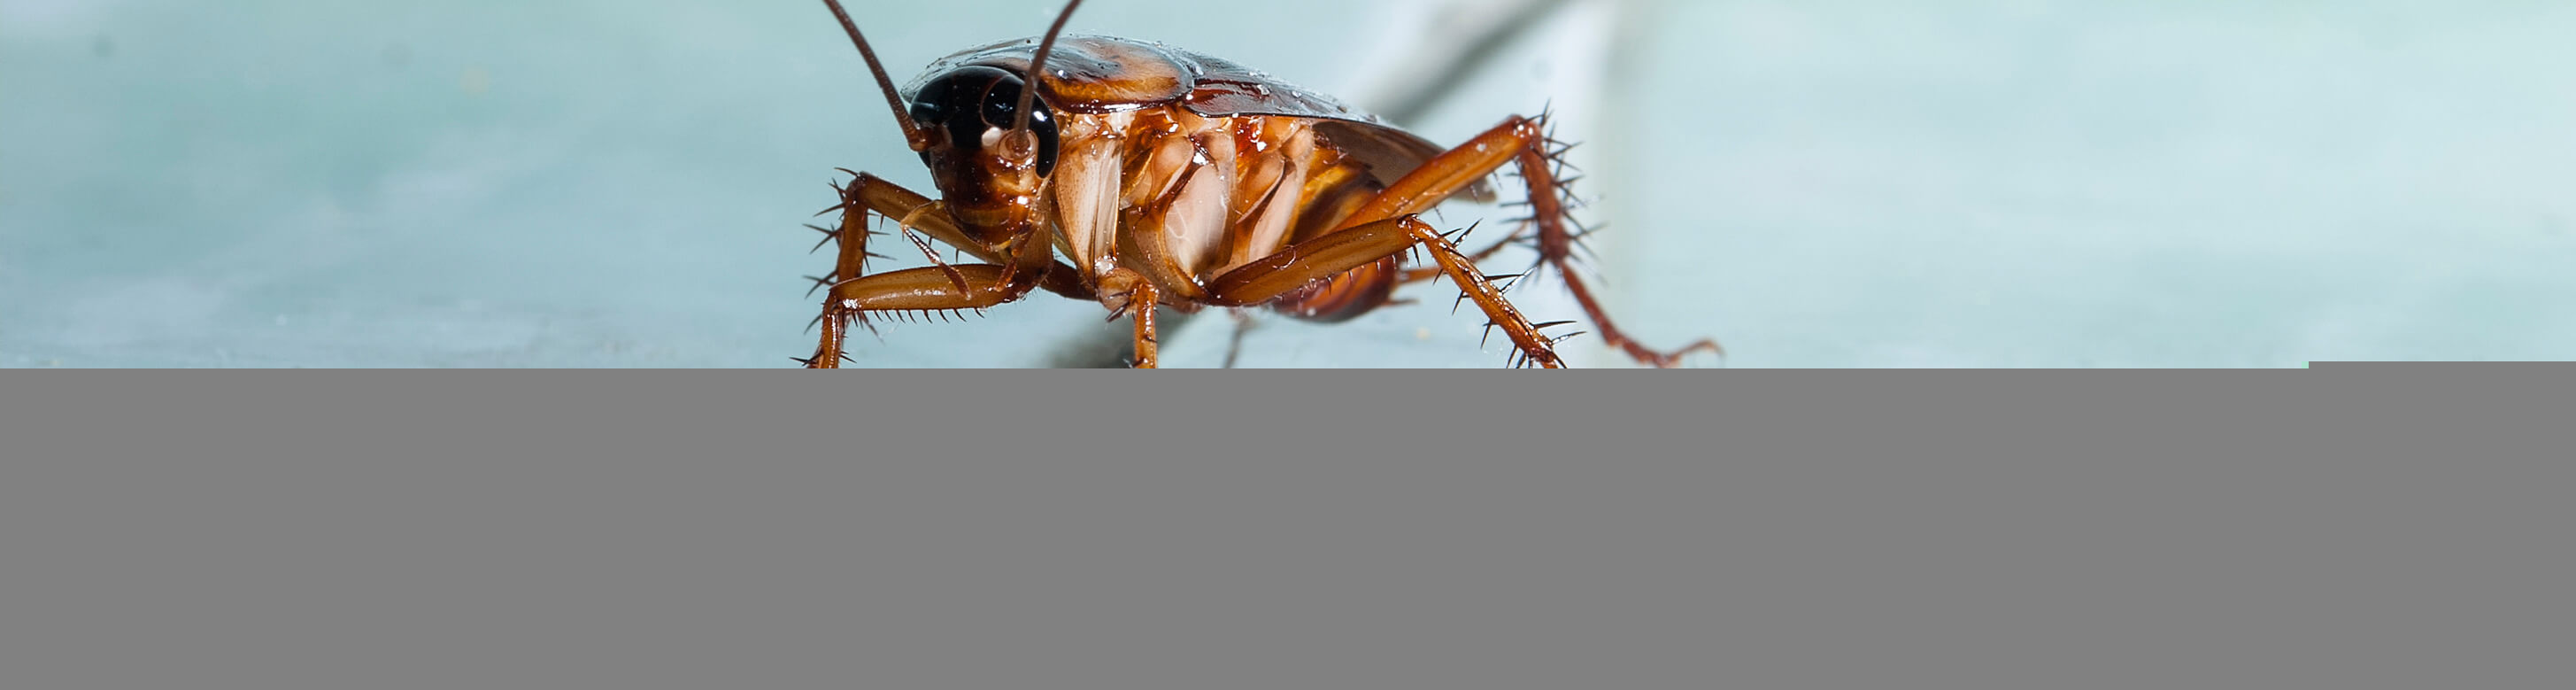 4 Ways Cockroaches Are More Dangerous Than You Thought